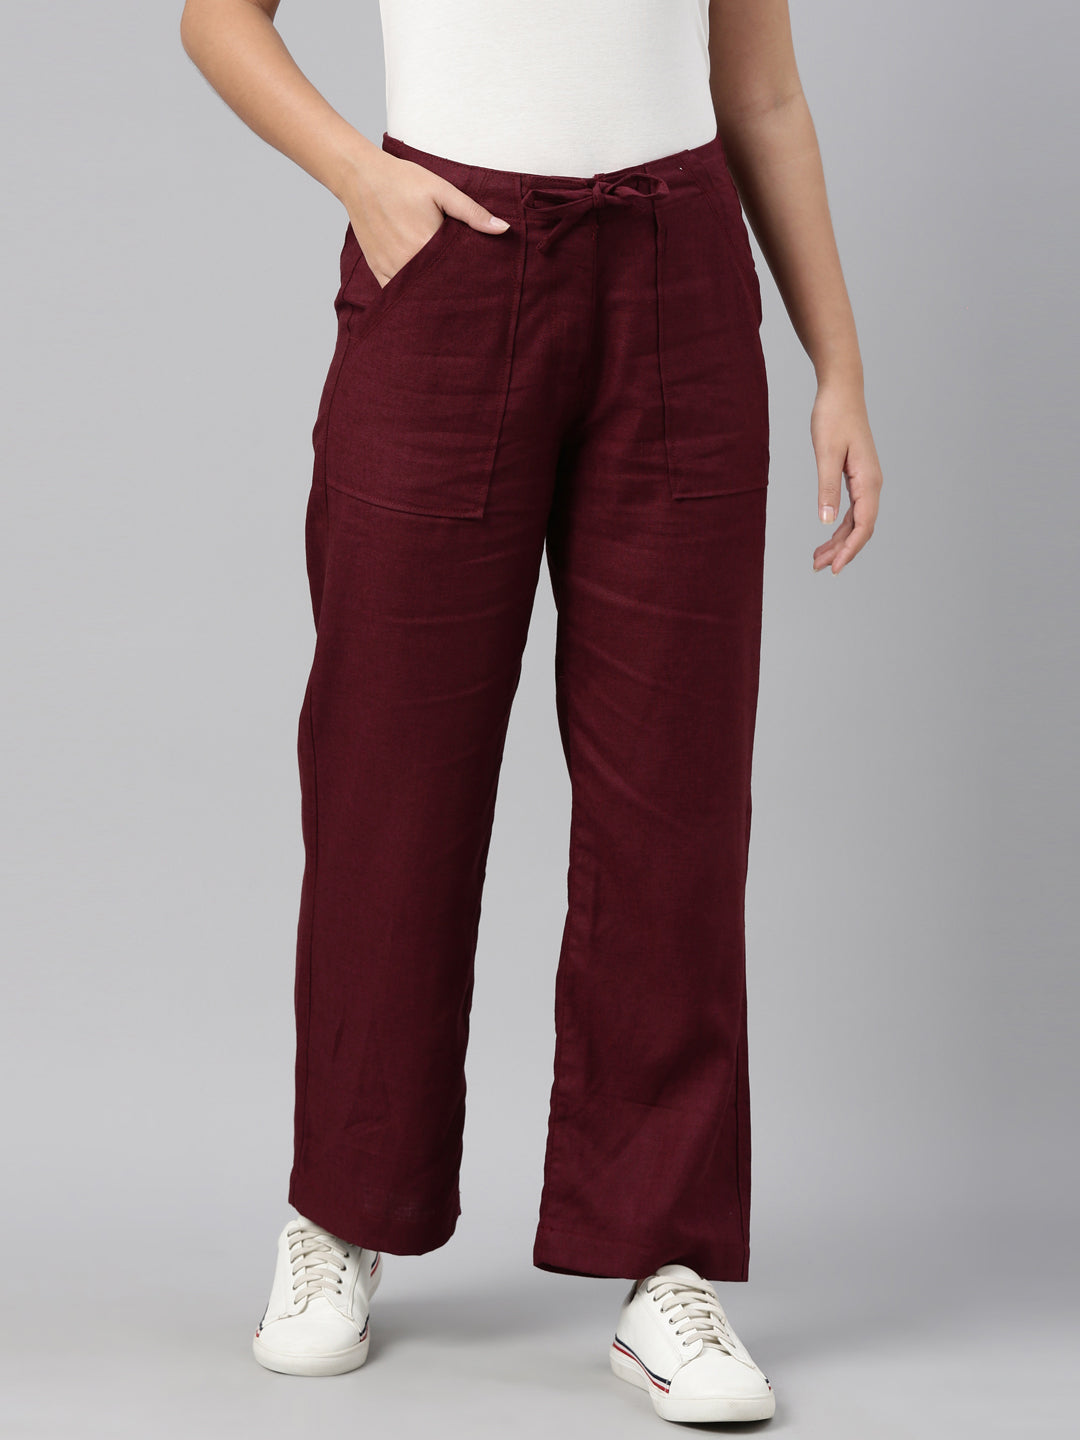 Buy Men's Maroon Relaxed Fit Cargo Trousers Online at Bewakoof